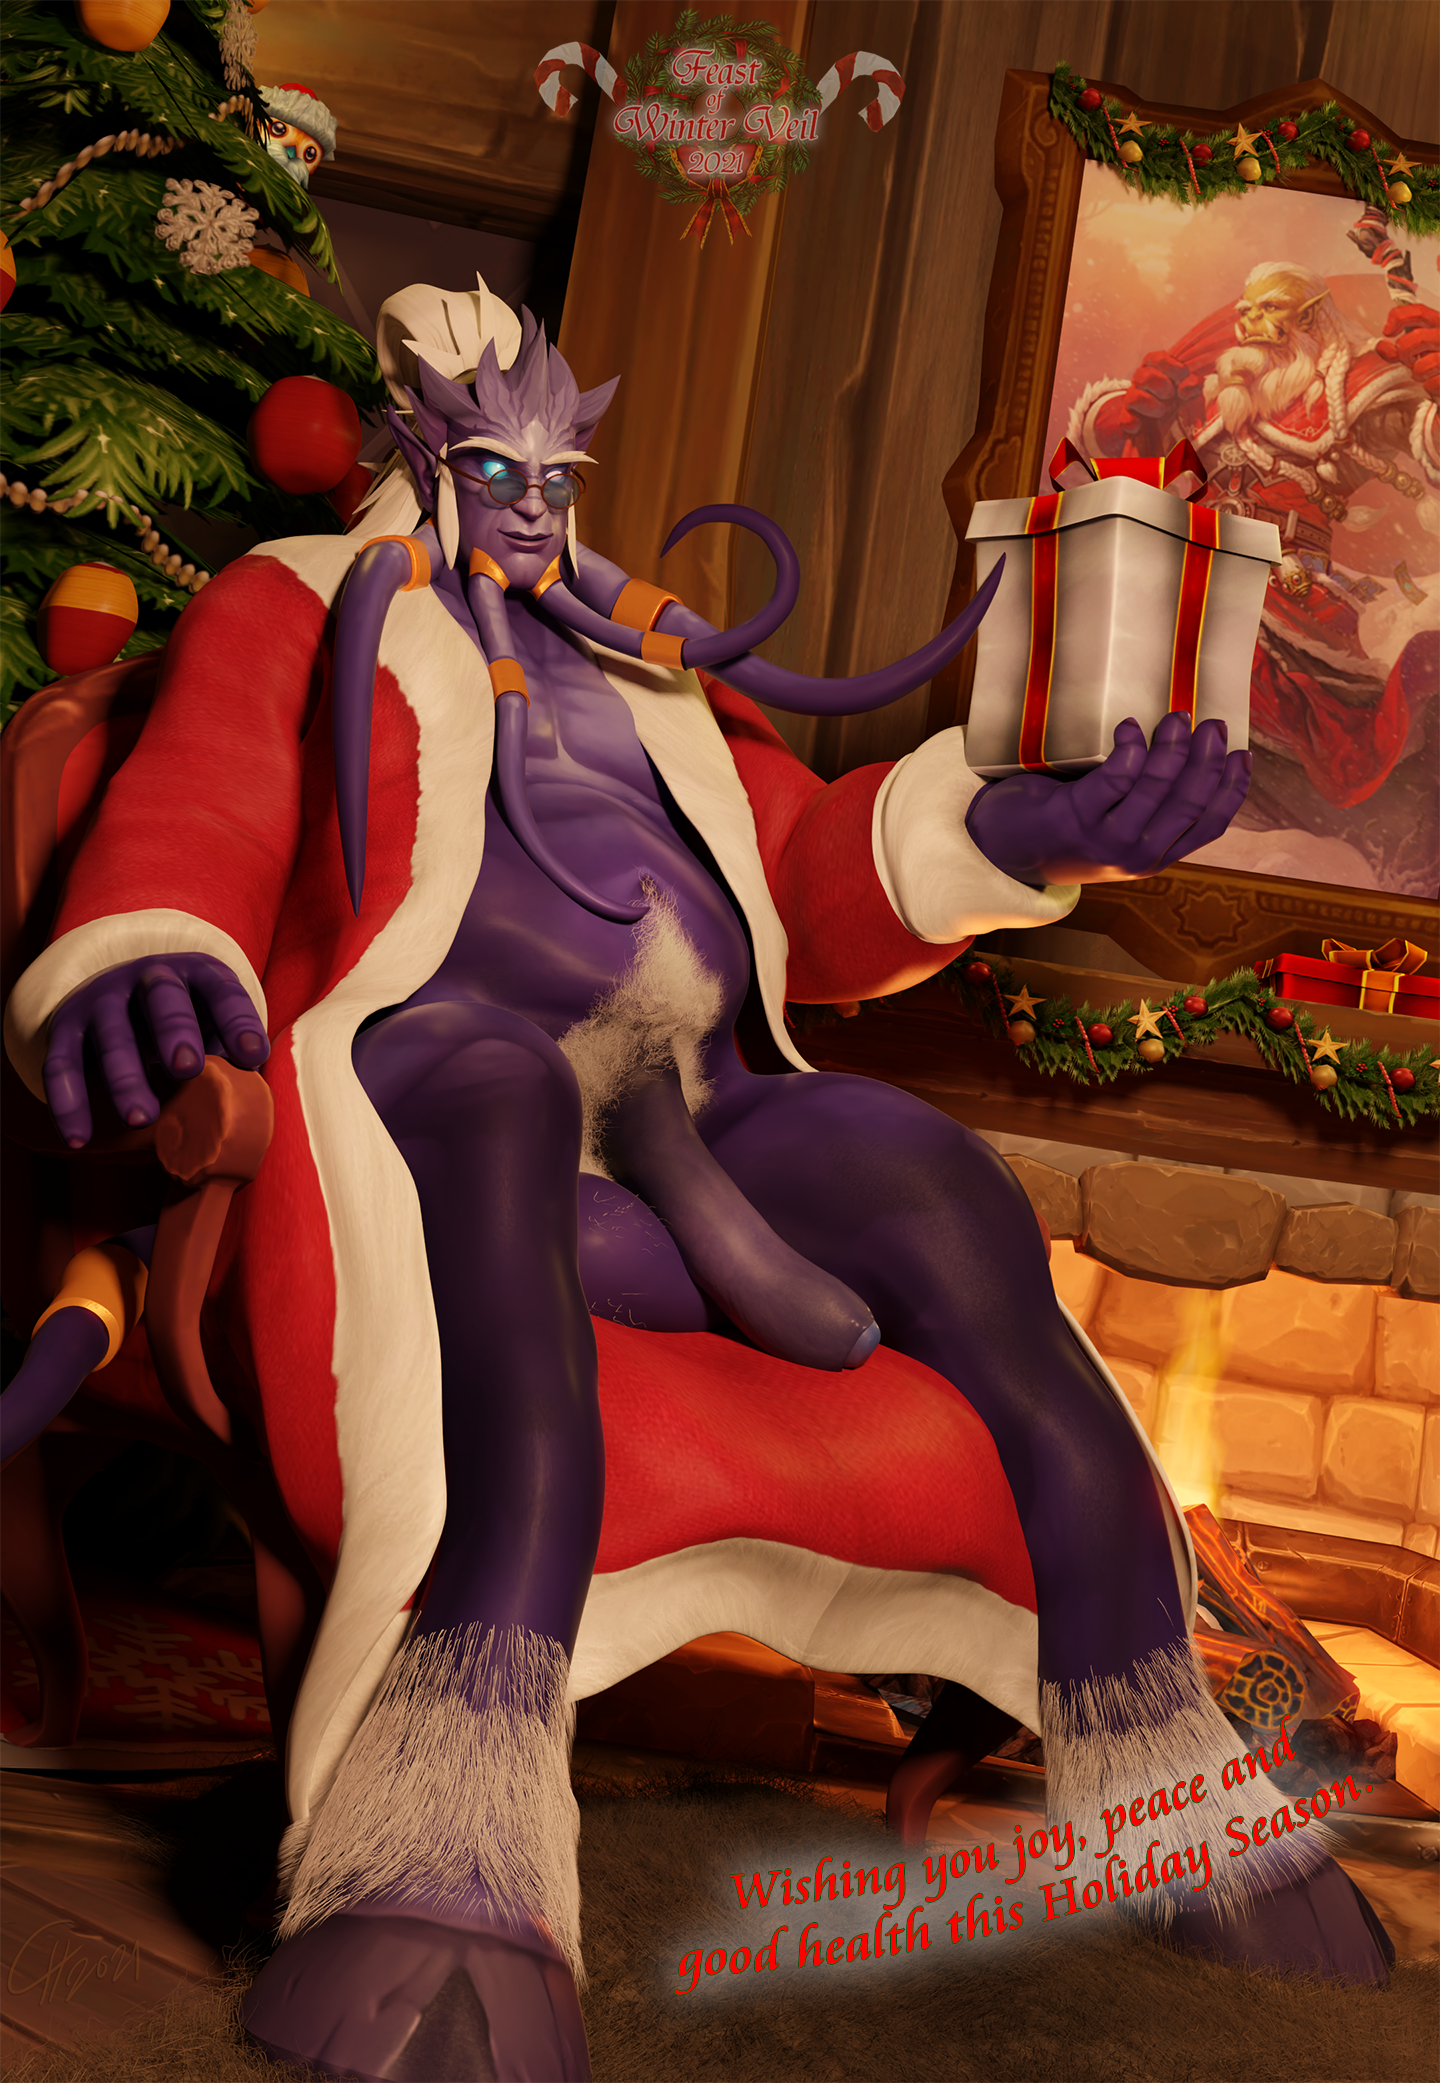 Winter Veil 2021: Gift Offering on the Eve [Draenei/Male Pinup]
The Eve of the Festivity is close and
so are the gifts! Some may get soft bundles,
some might get hard packages.
Which one will you recieve this Holiday?
[b][url=http://bakaras.com/murlocish/albums/userpics/10001/22/WinterVeil2021-05-18XL.png]==XL-Size Edit==?[/url][/b]
Keywords: OC;Draenei;Rule63;male pinup